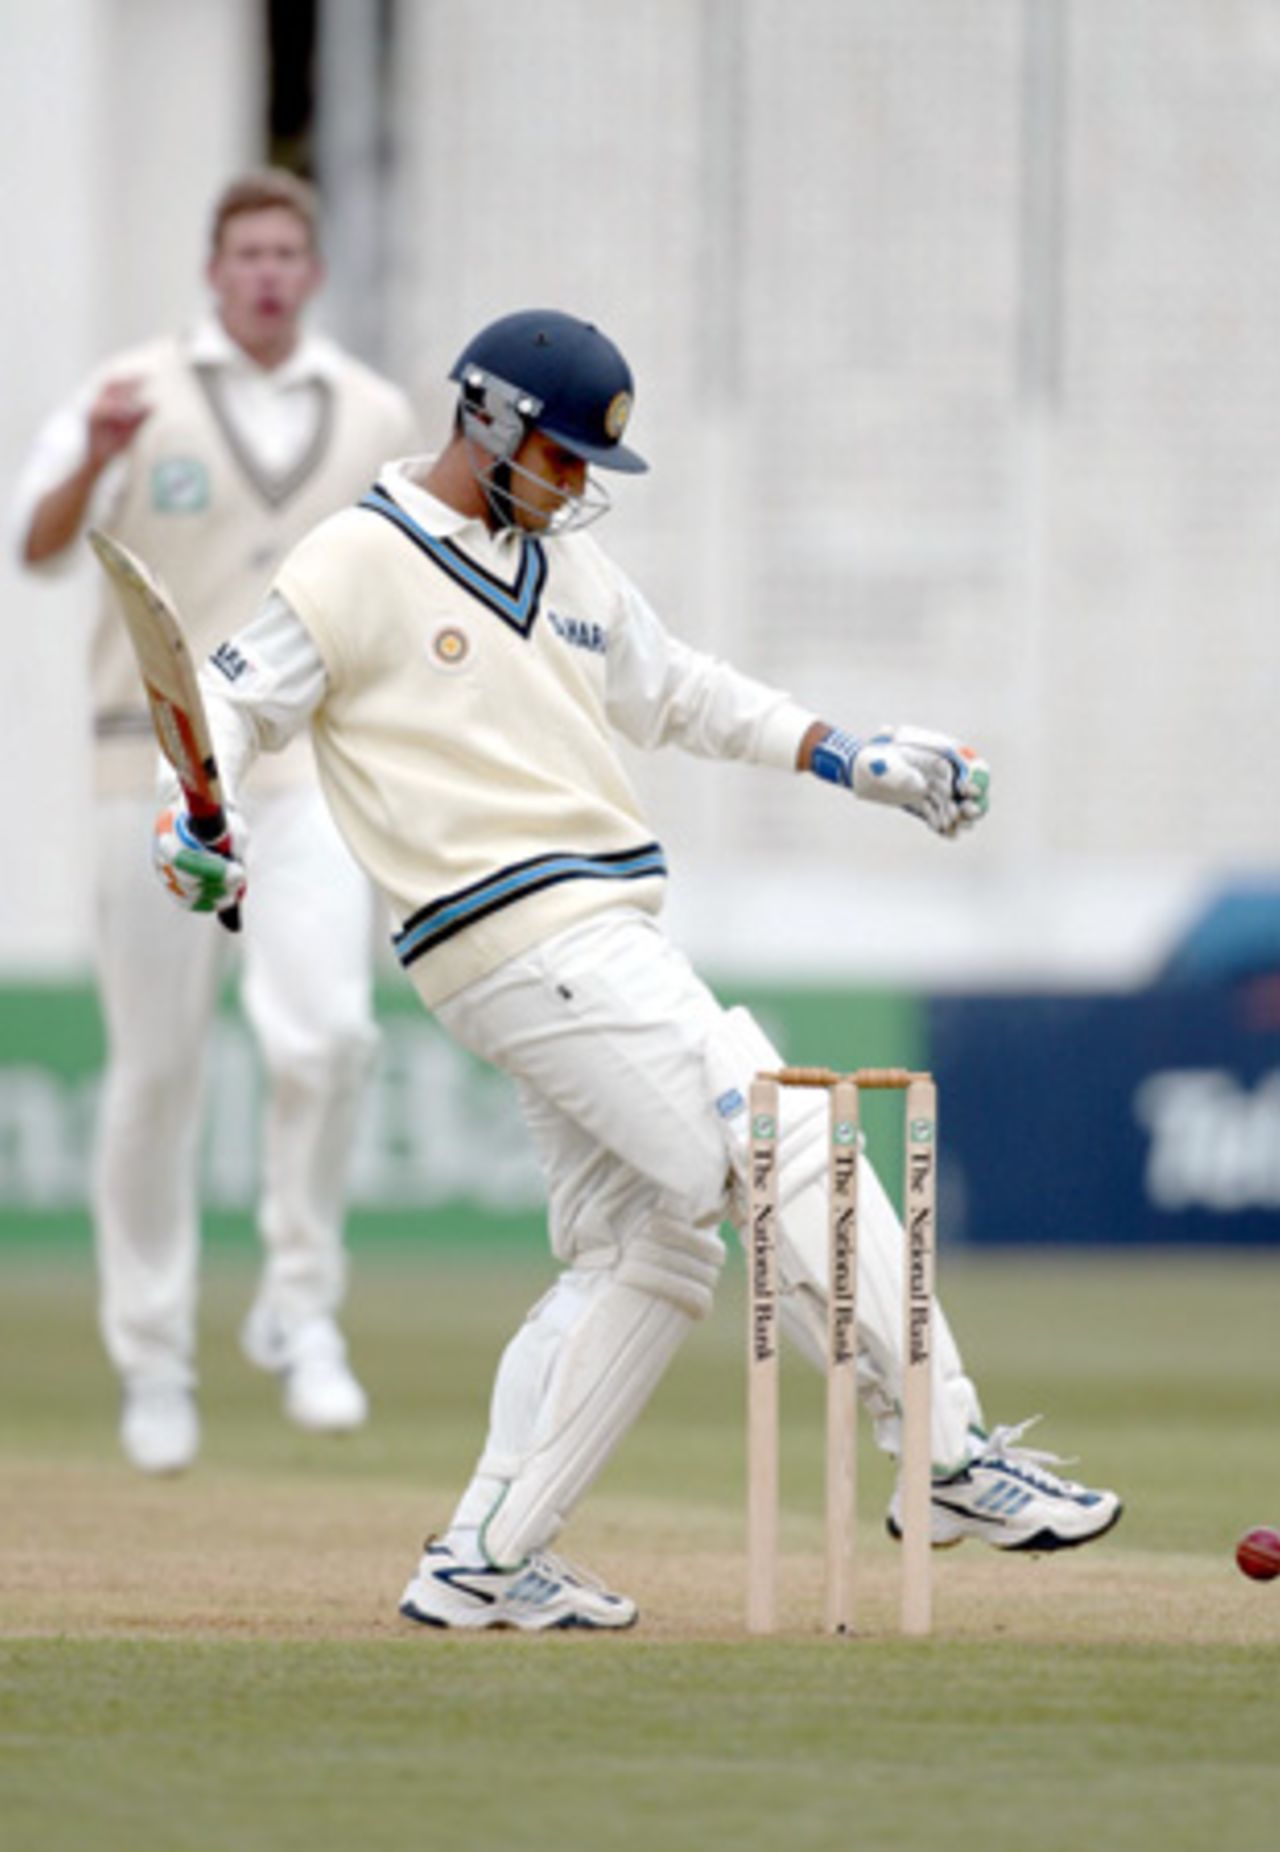 Indian batsman Sourav Ganguly kicks the ball away after a delivery from New Zealand bowler Jacob Oram threatened the stumps. 1st Test: New Zealand v India at Basin Reserve, Wellington, 12-16 December 2002 (12 December 2002).